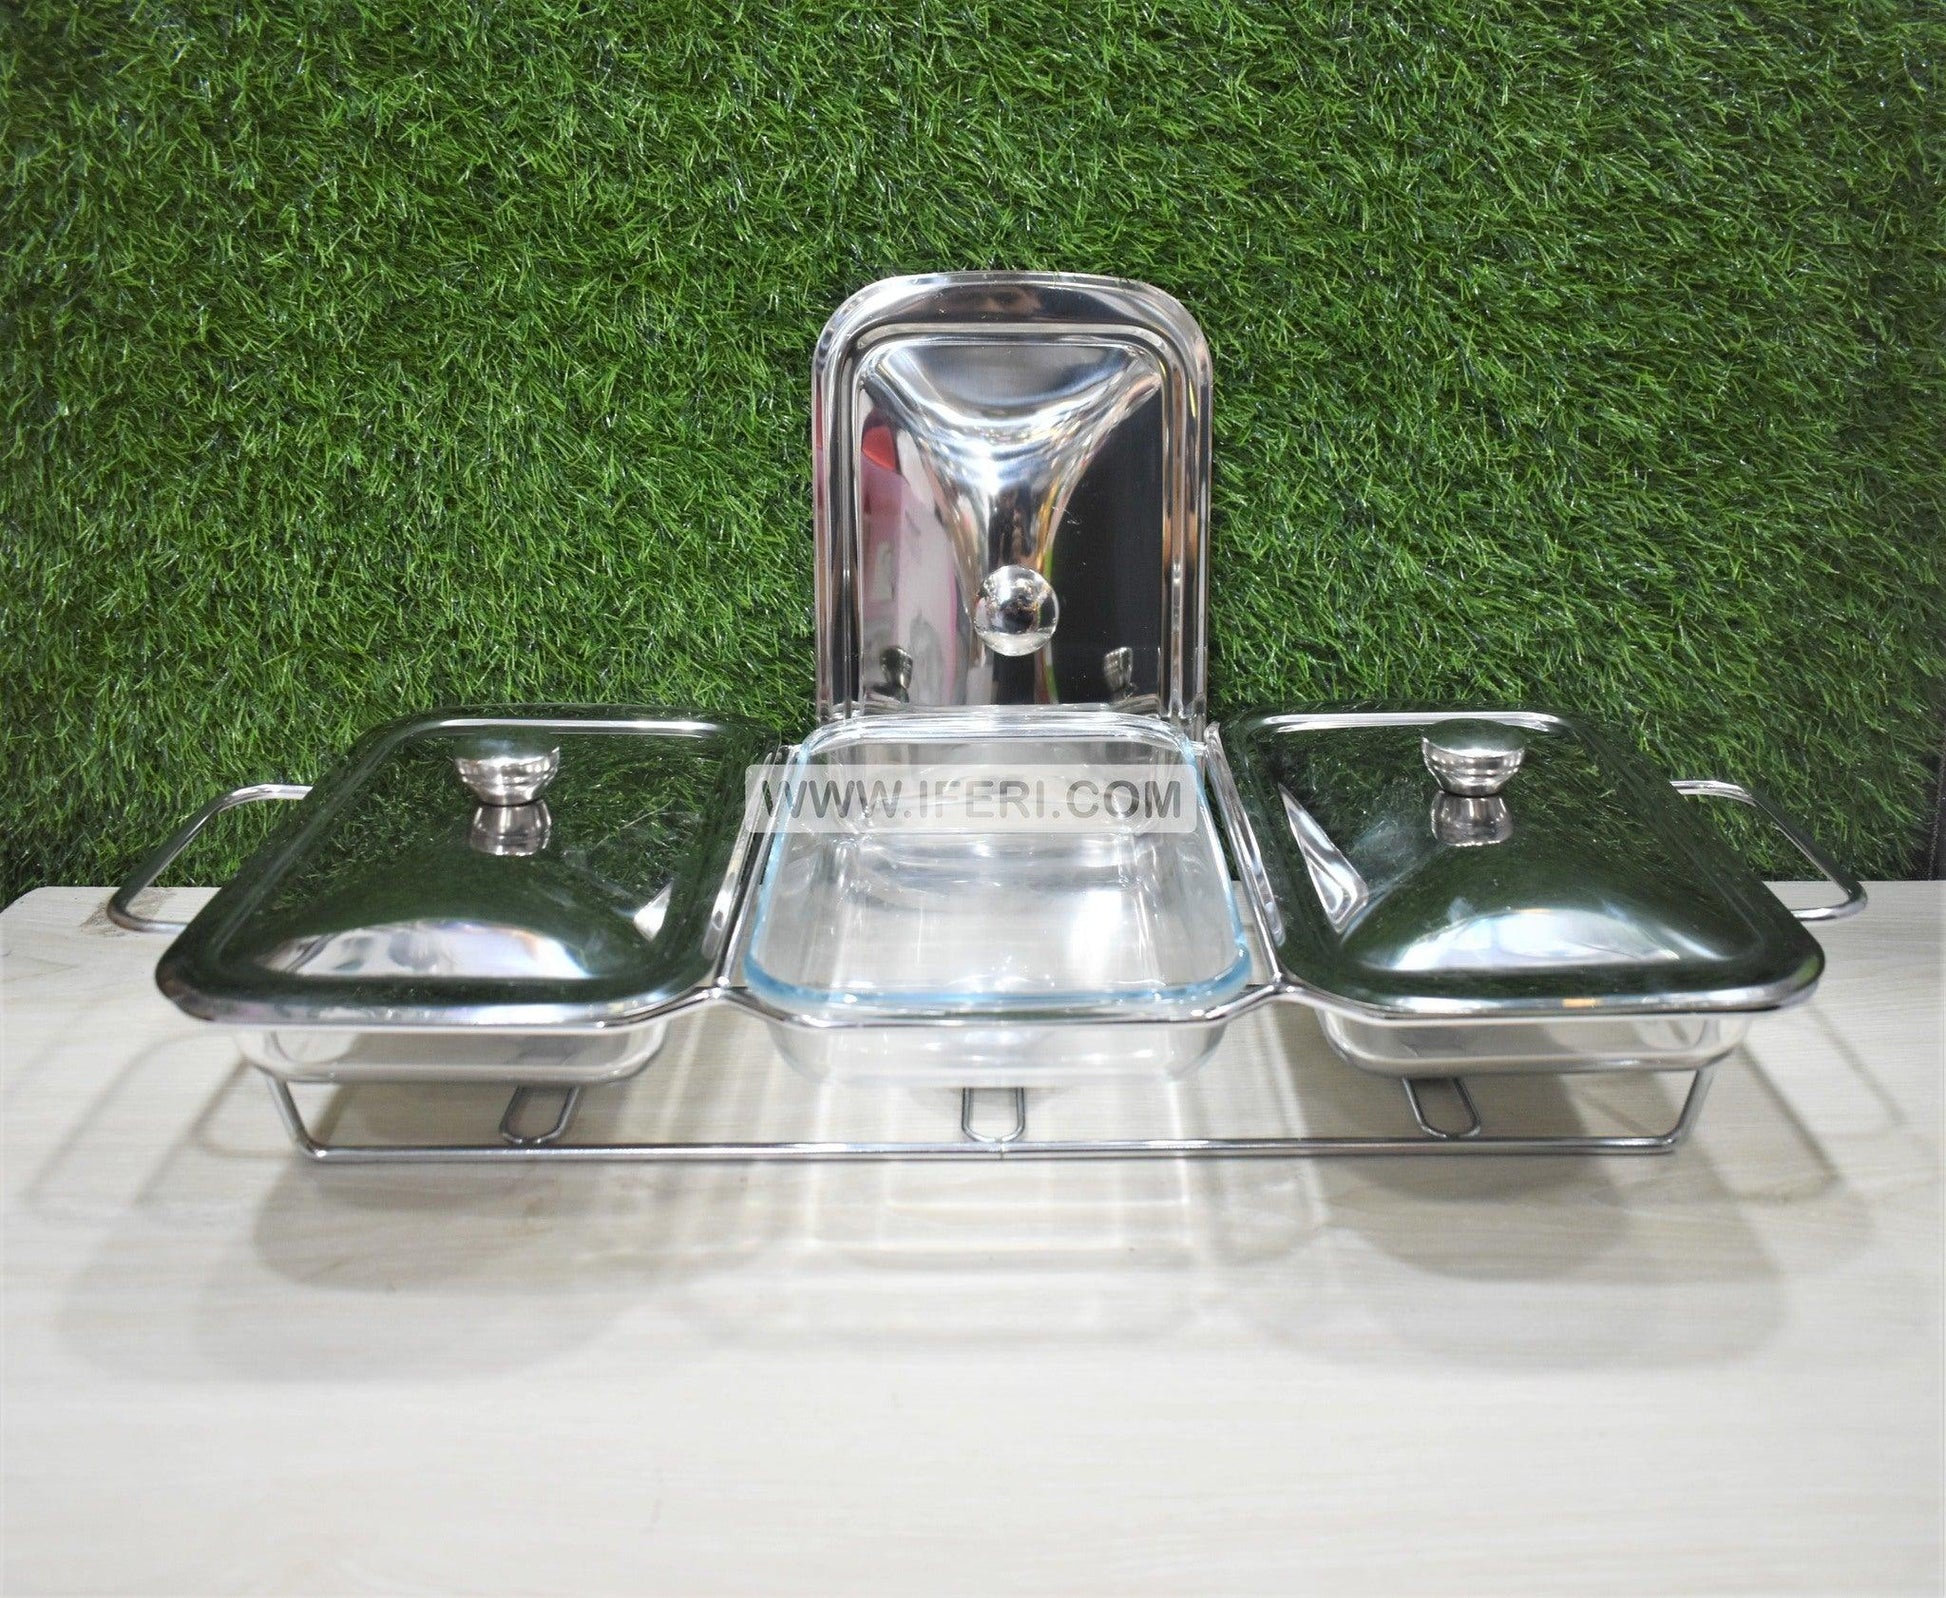 4.5 Ltr Chafing Dish Food Warmer DP711 - Price in BD at iferi.com